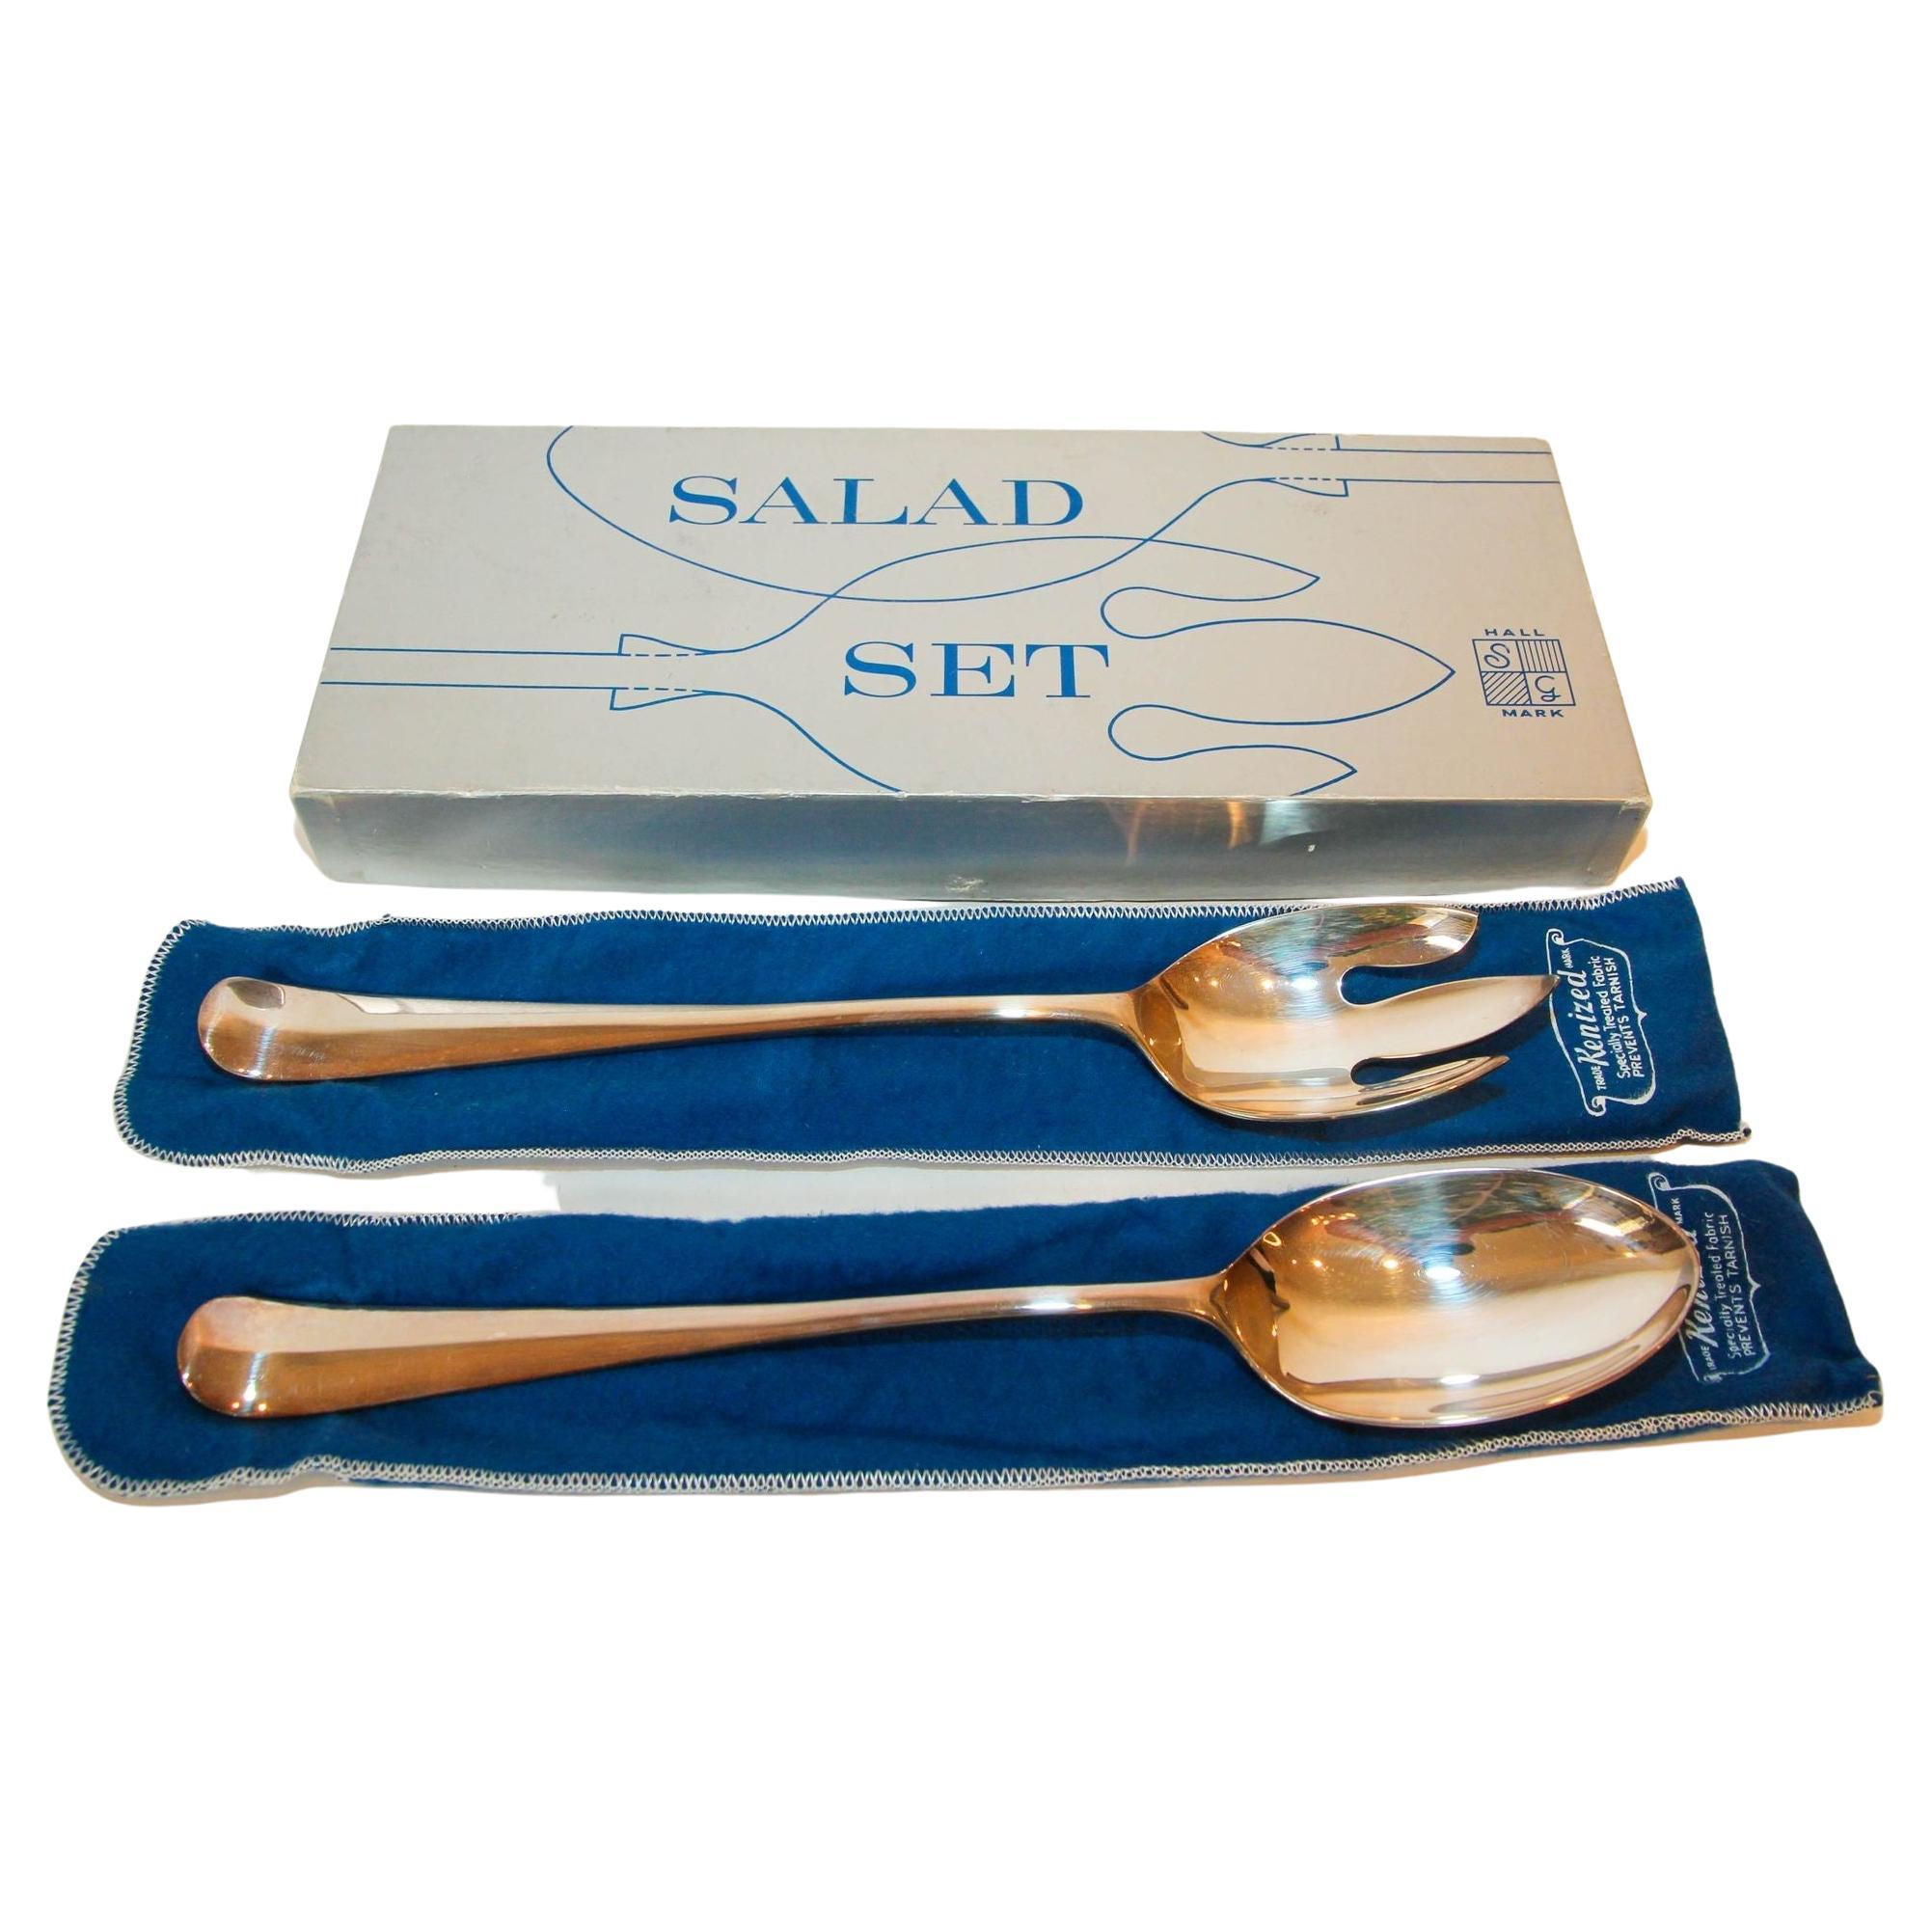 1950s SG Hall Mark England Large Silver Plate Serving Spoon and Fork Set